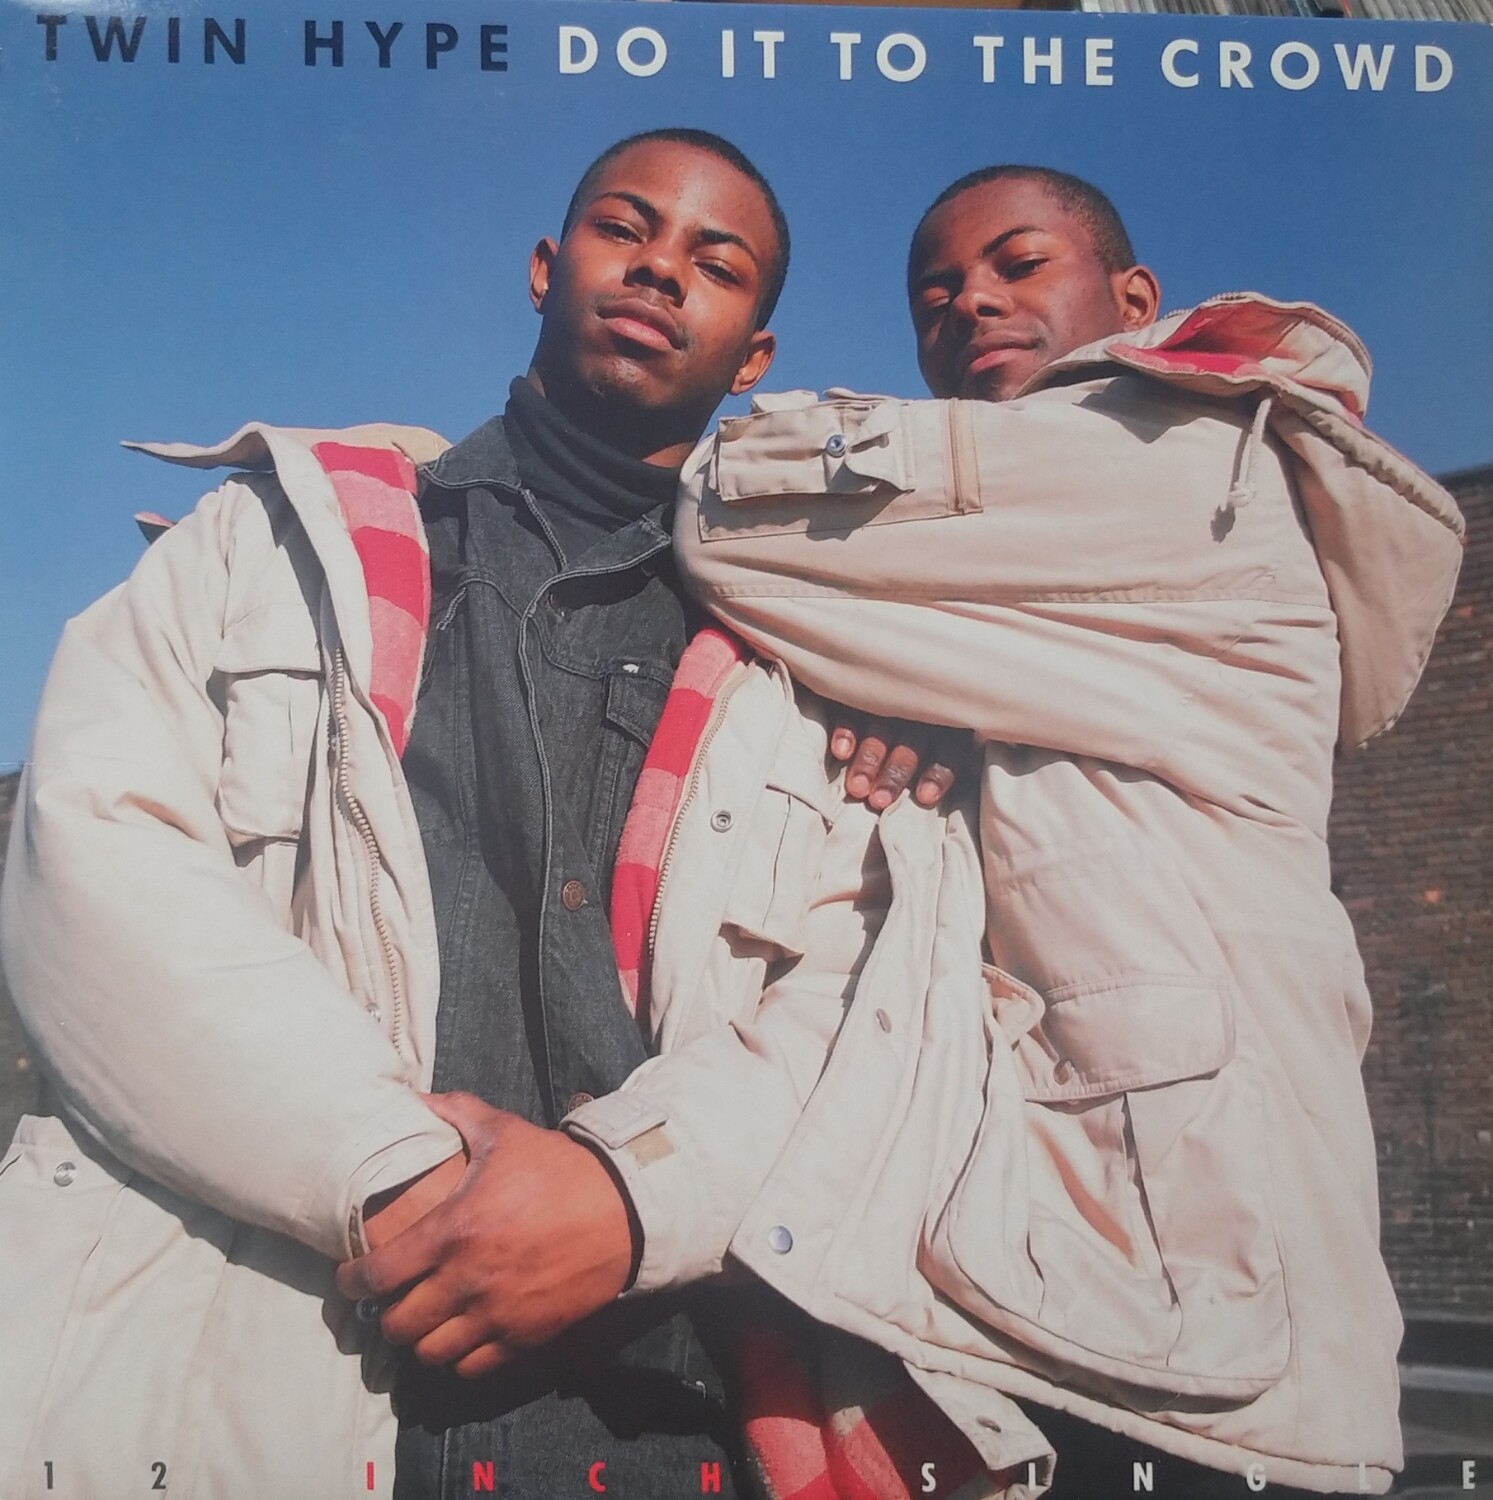 Twin Hype - Do it to the crowd